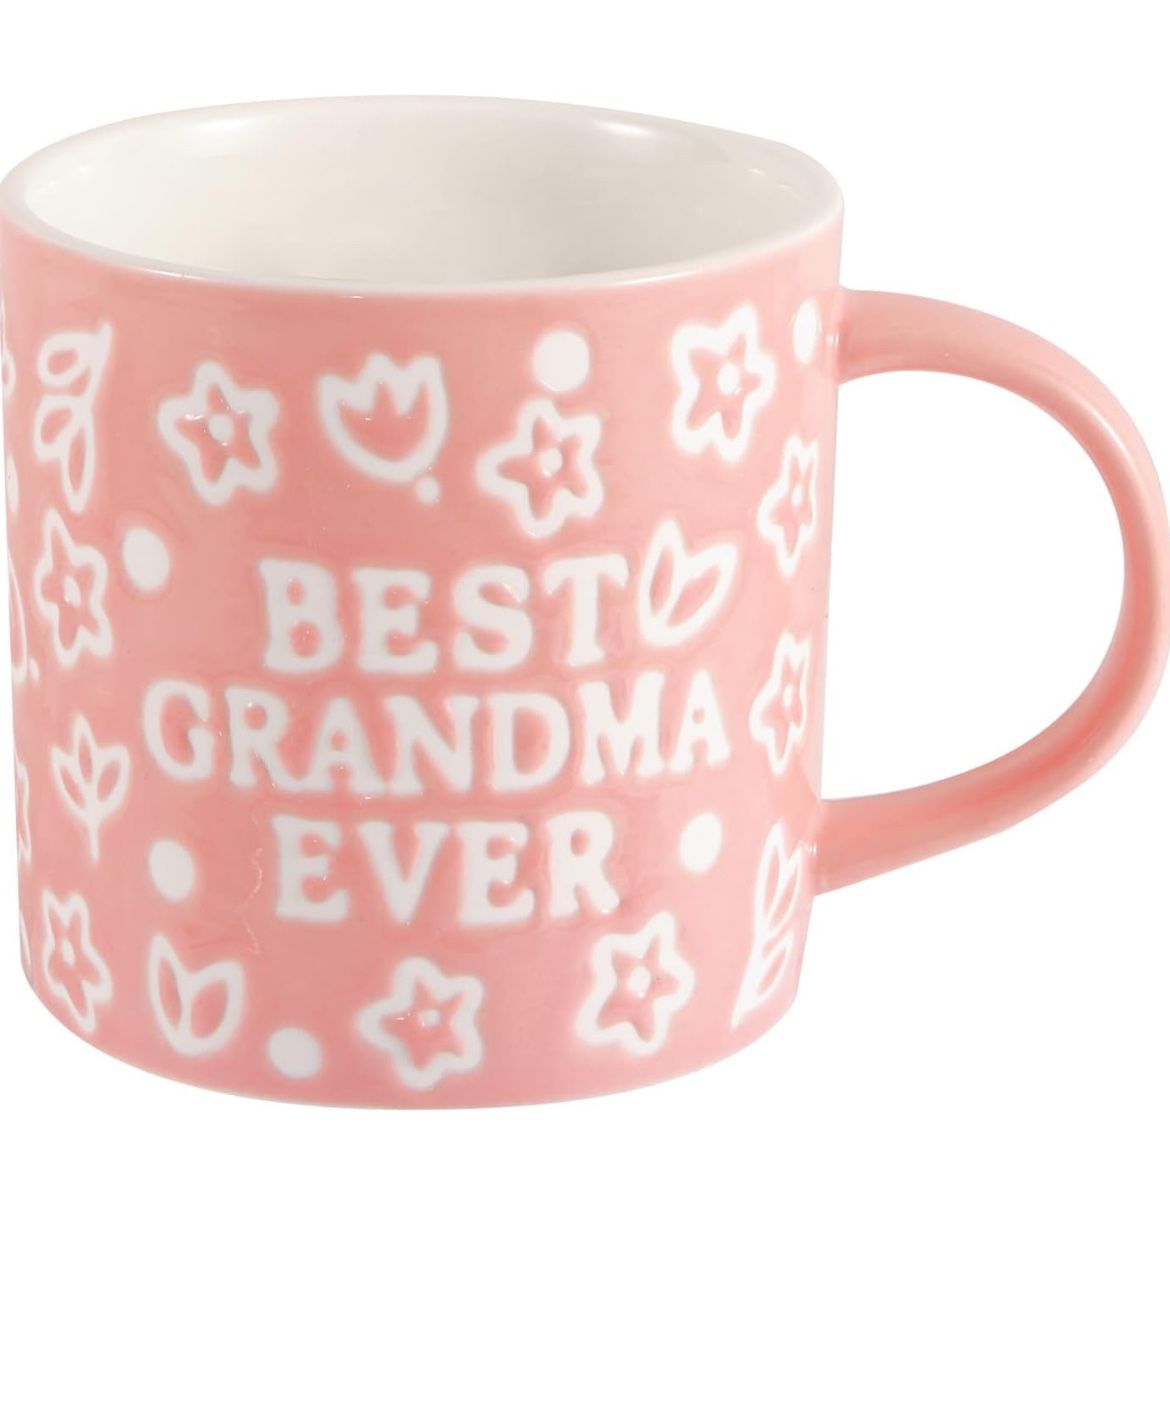  Grandma- Mothers Day Birthday Gifts for from Granddaughter Grandson - best grandma Ever Floral Embossed Pattern Ceramic Coffee Mug 13.5OZ